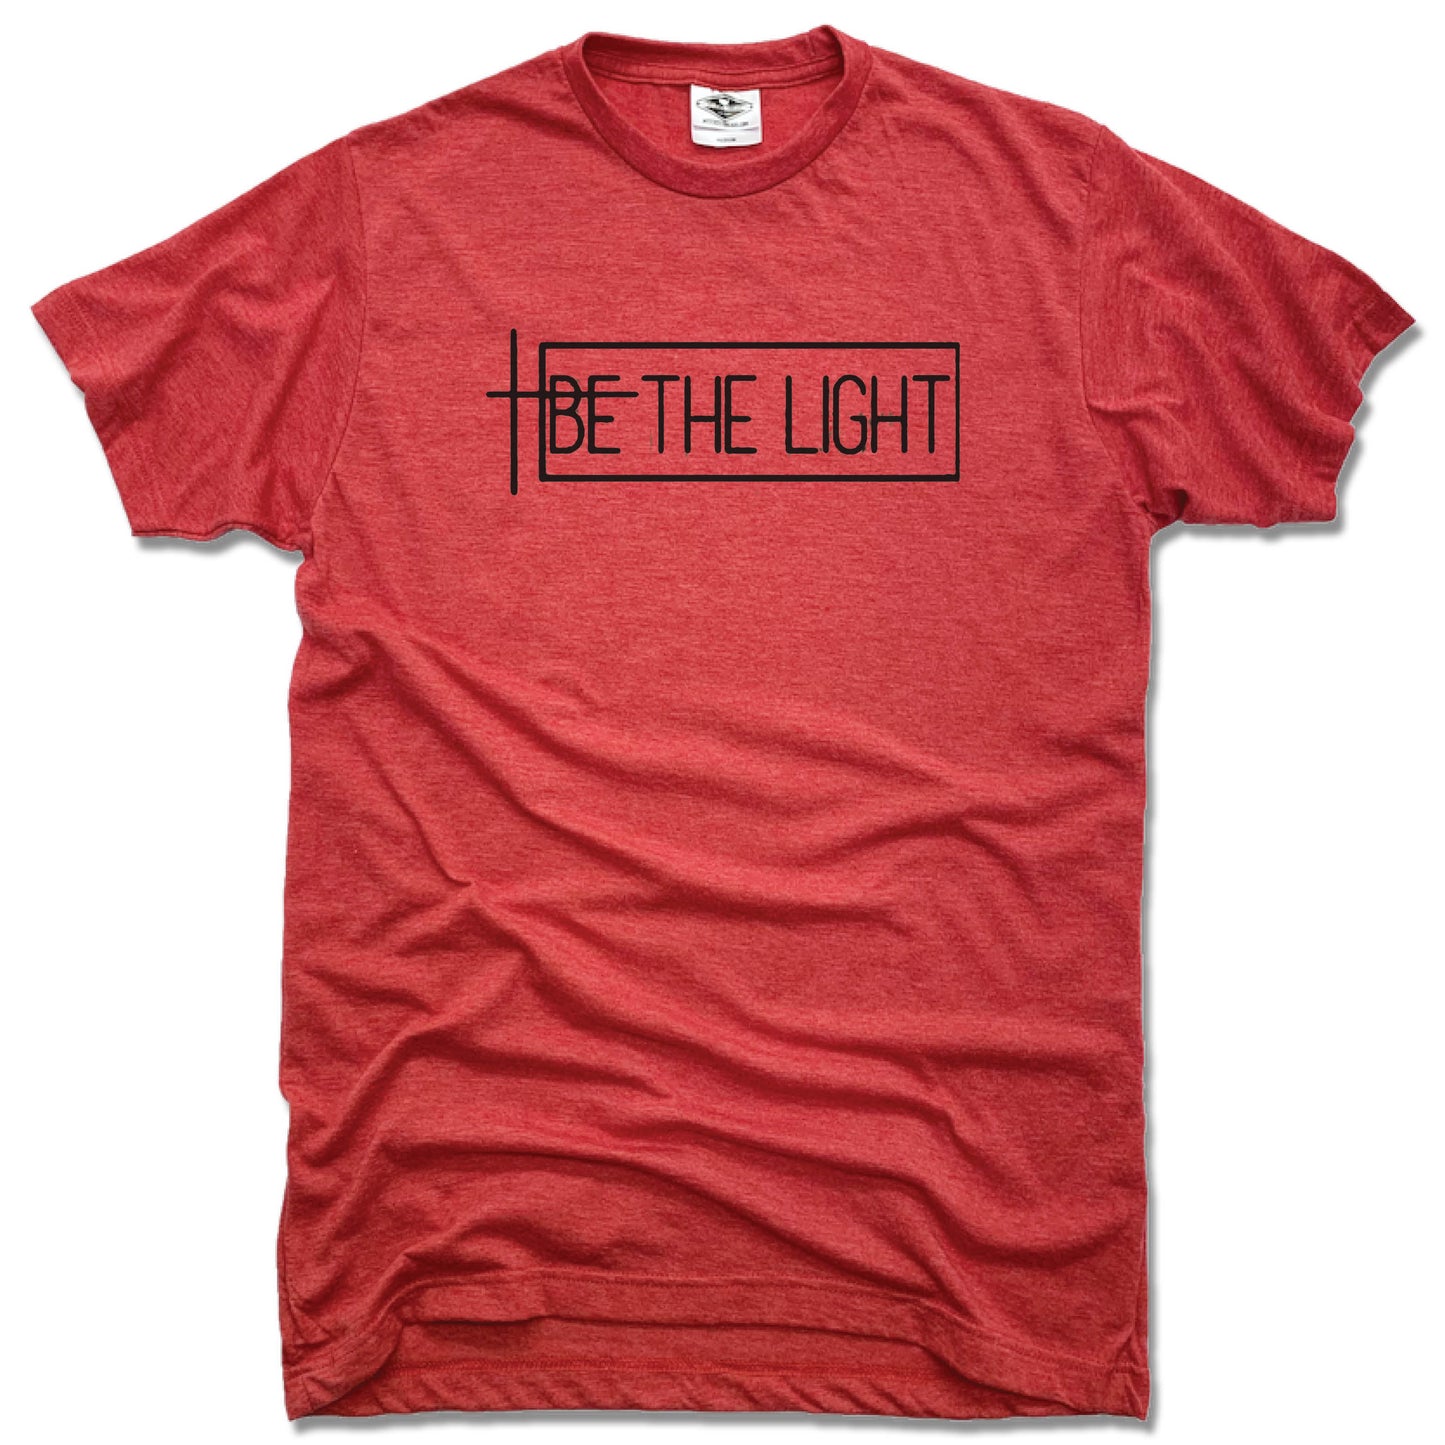 THE SISTER'S CLOSET | UNISEX RED TEE | BE THE LIGHT